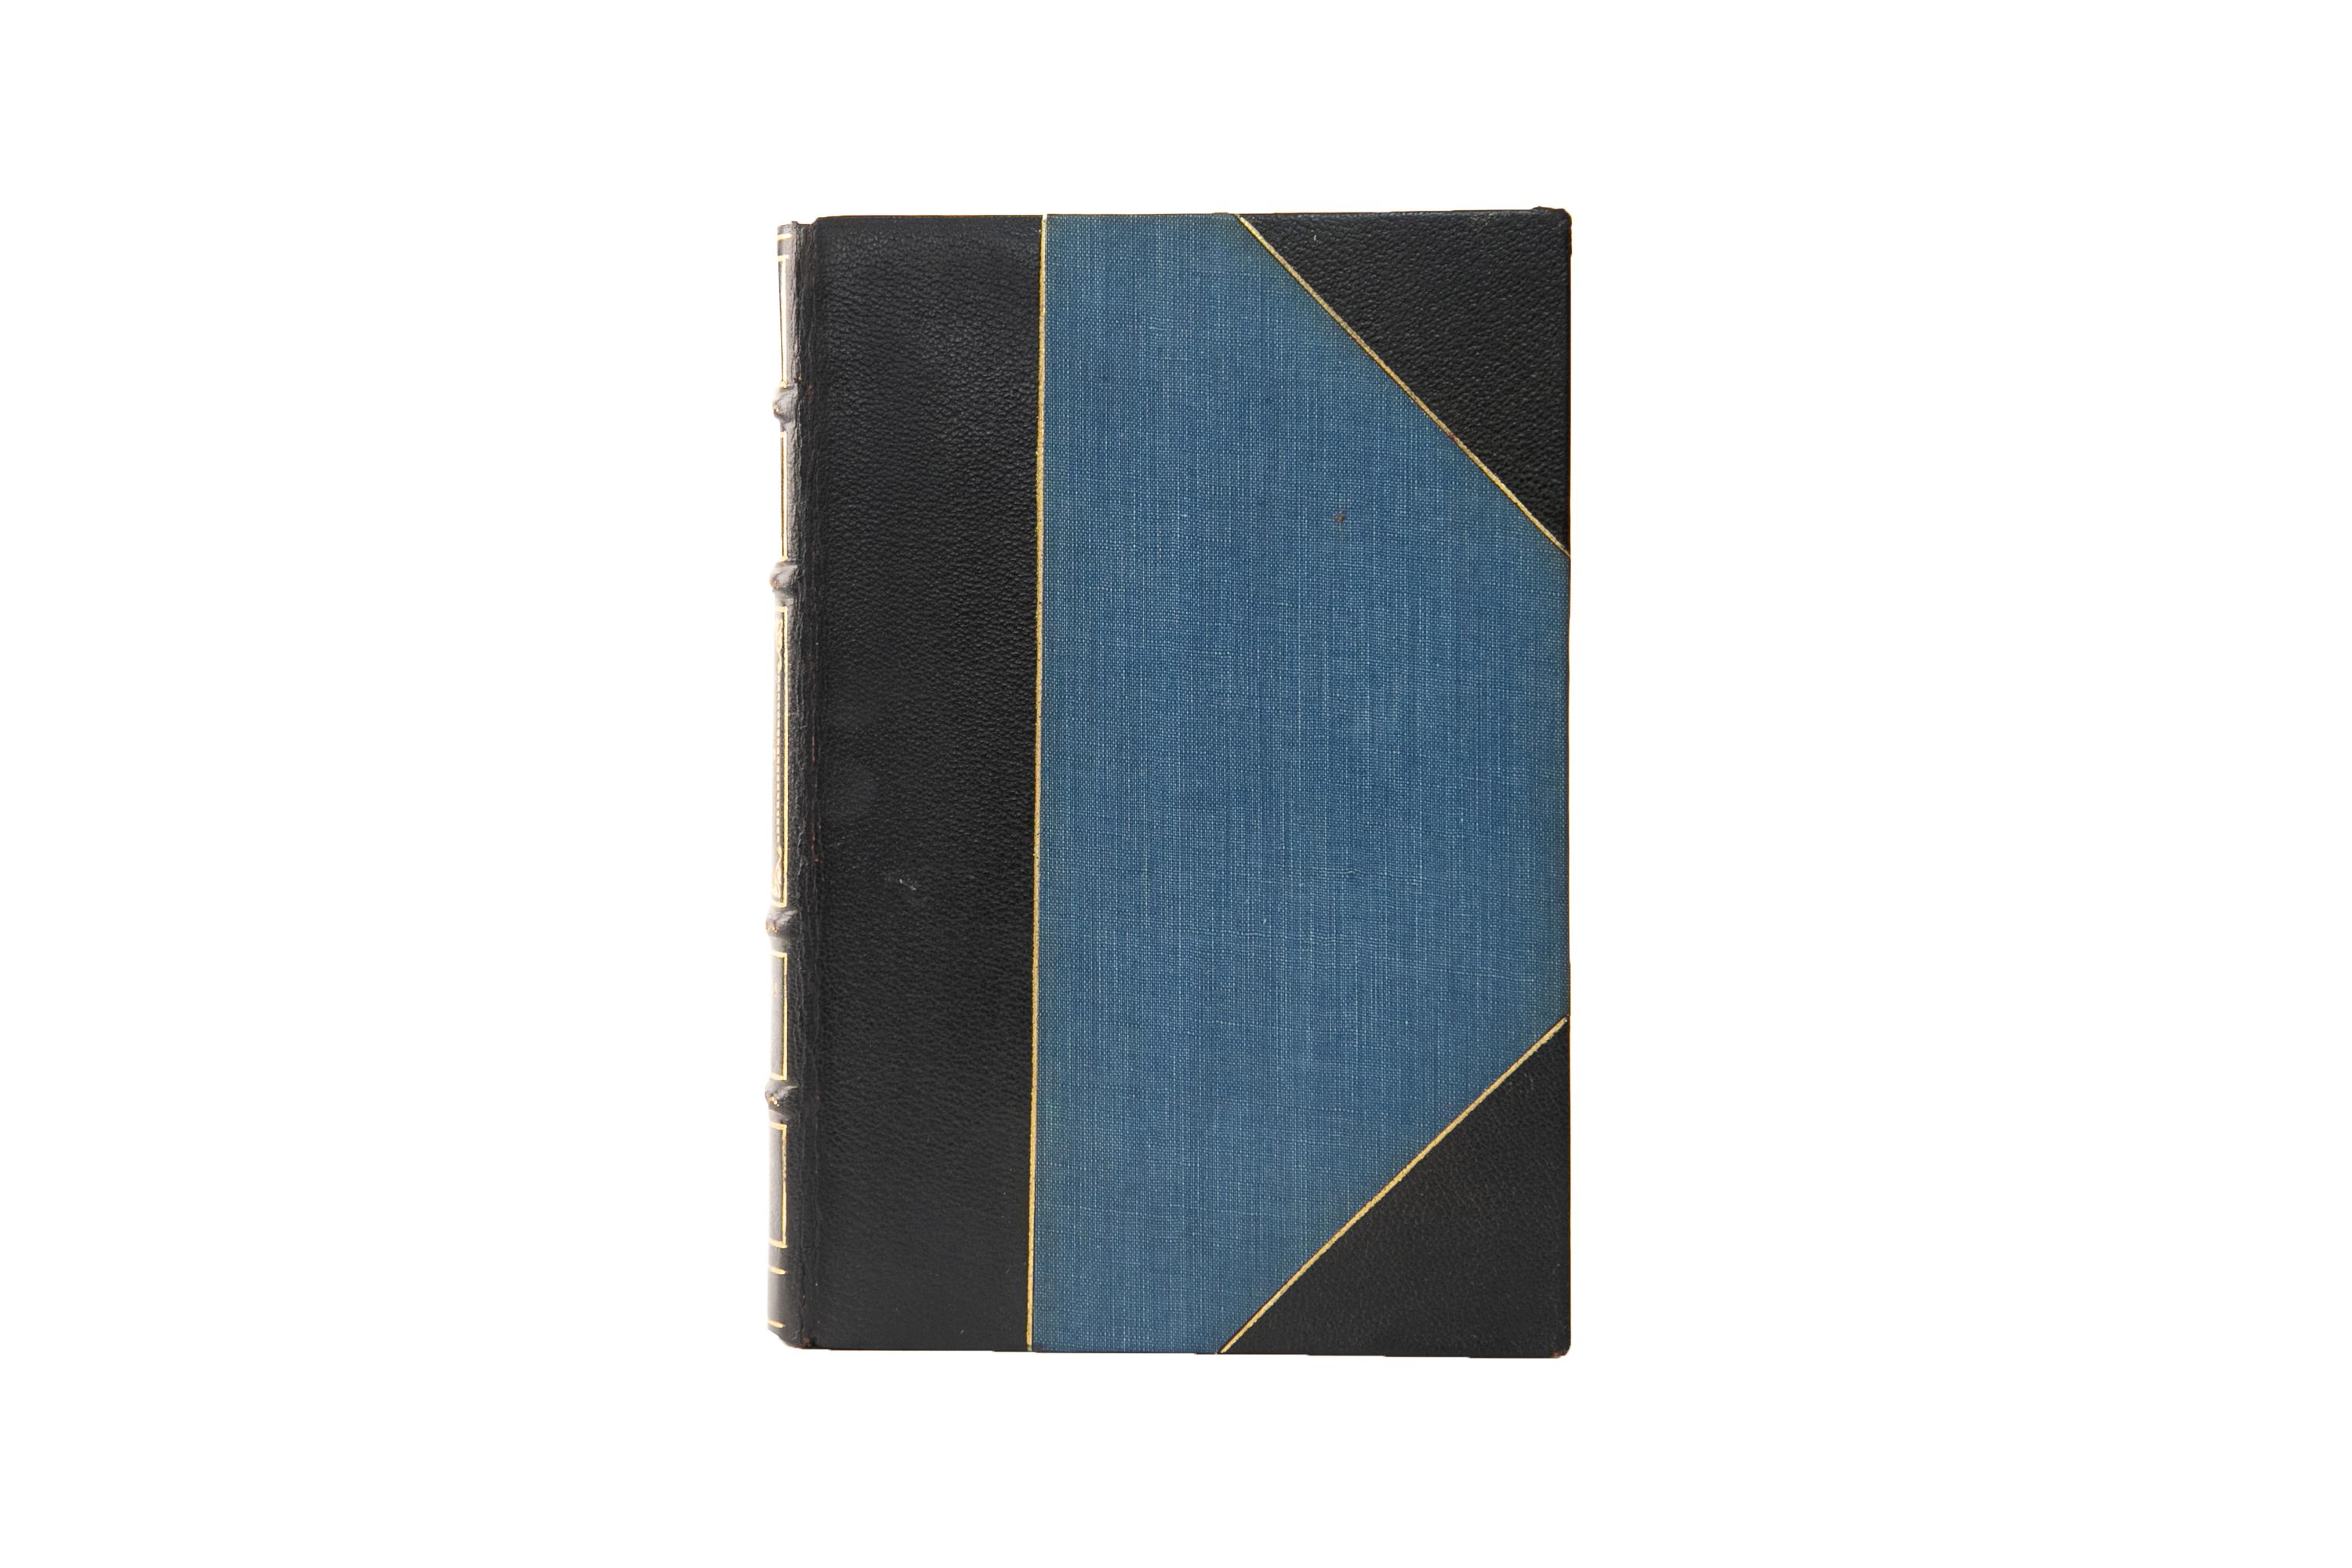 32 Volumes. Robert Louis Stevenson, The Complete Works. Limited Edinburgh Edition. Bound in 3/4 blue morocco and linen boards, bordered in gilt tooling. The spines display raised bands, floral panel details, bordering, and label lettering, all